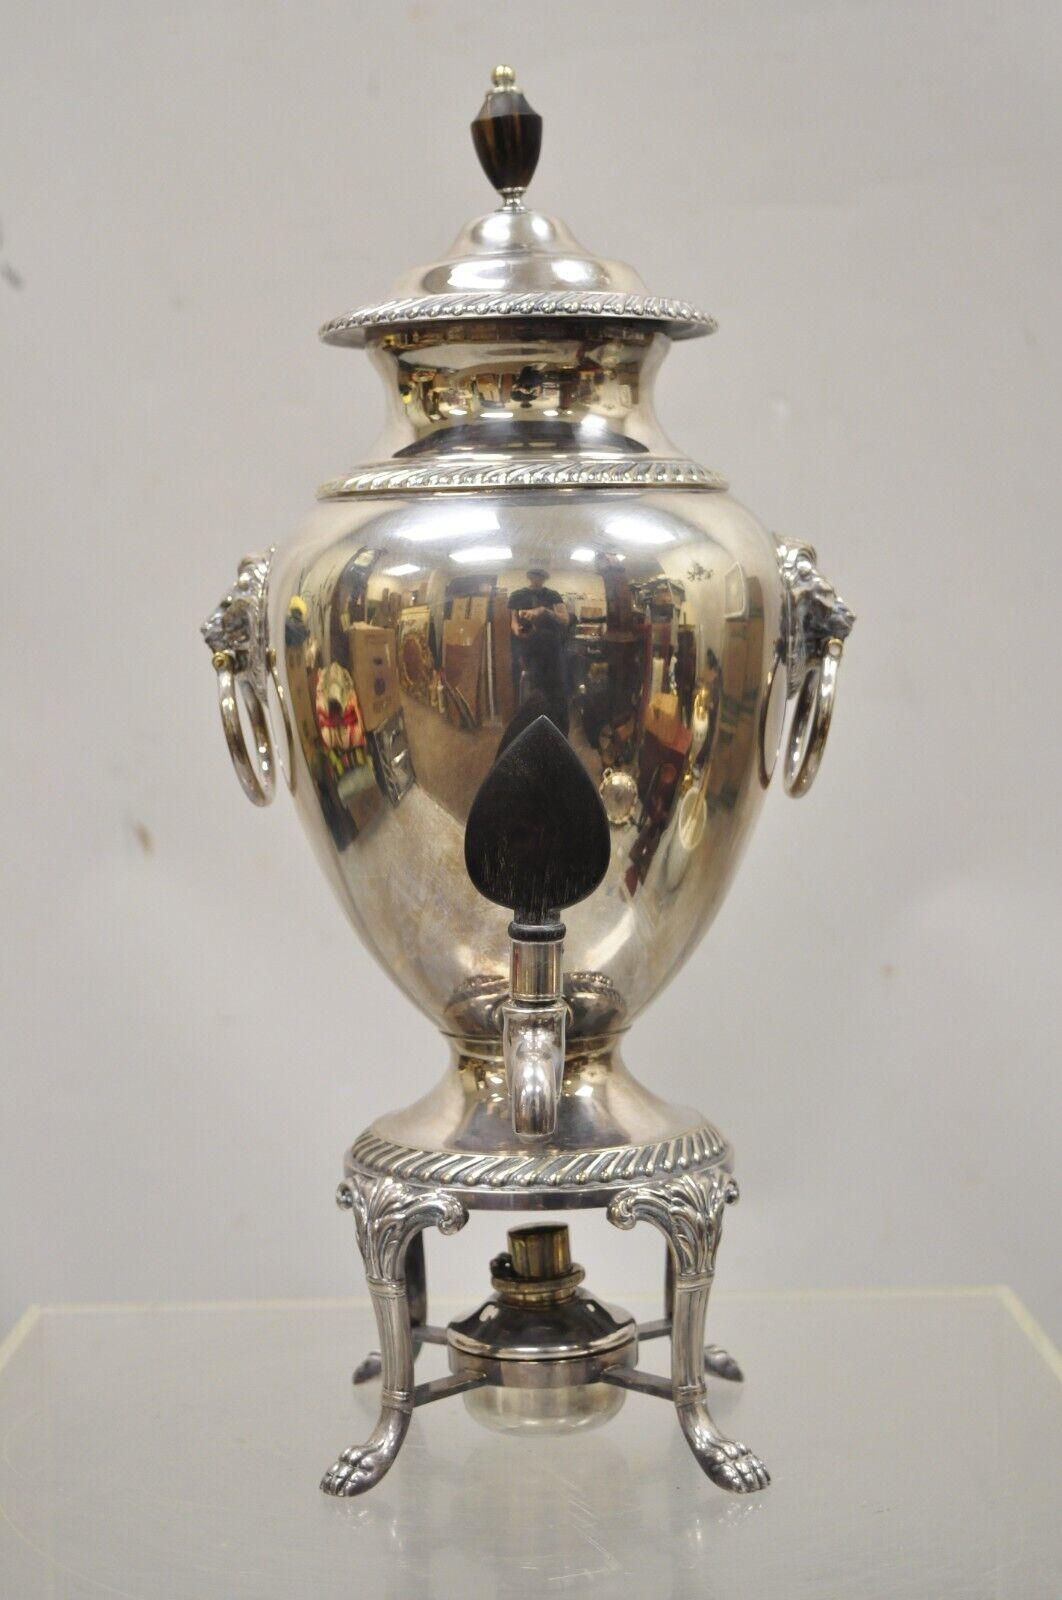 Silver plated Samovar coffee tea Urn Regency lions By International Silver Co. Item features removable lid and bunson burner, lion head, drop ring handles, wooden finial, original stamp, very nice antique item. Circa Early to Mid 20th Century.